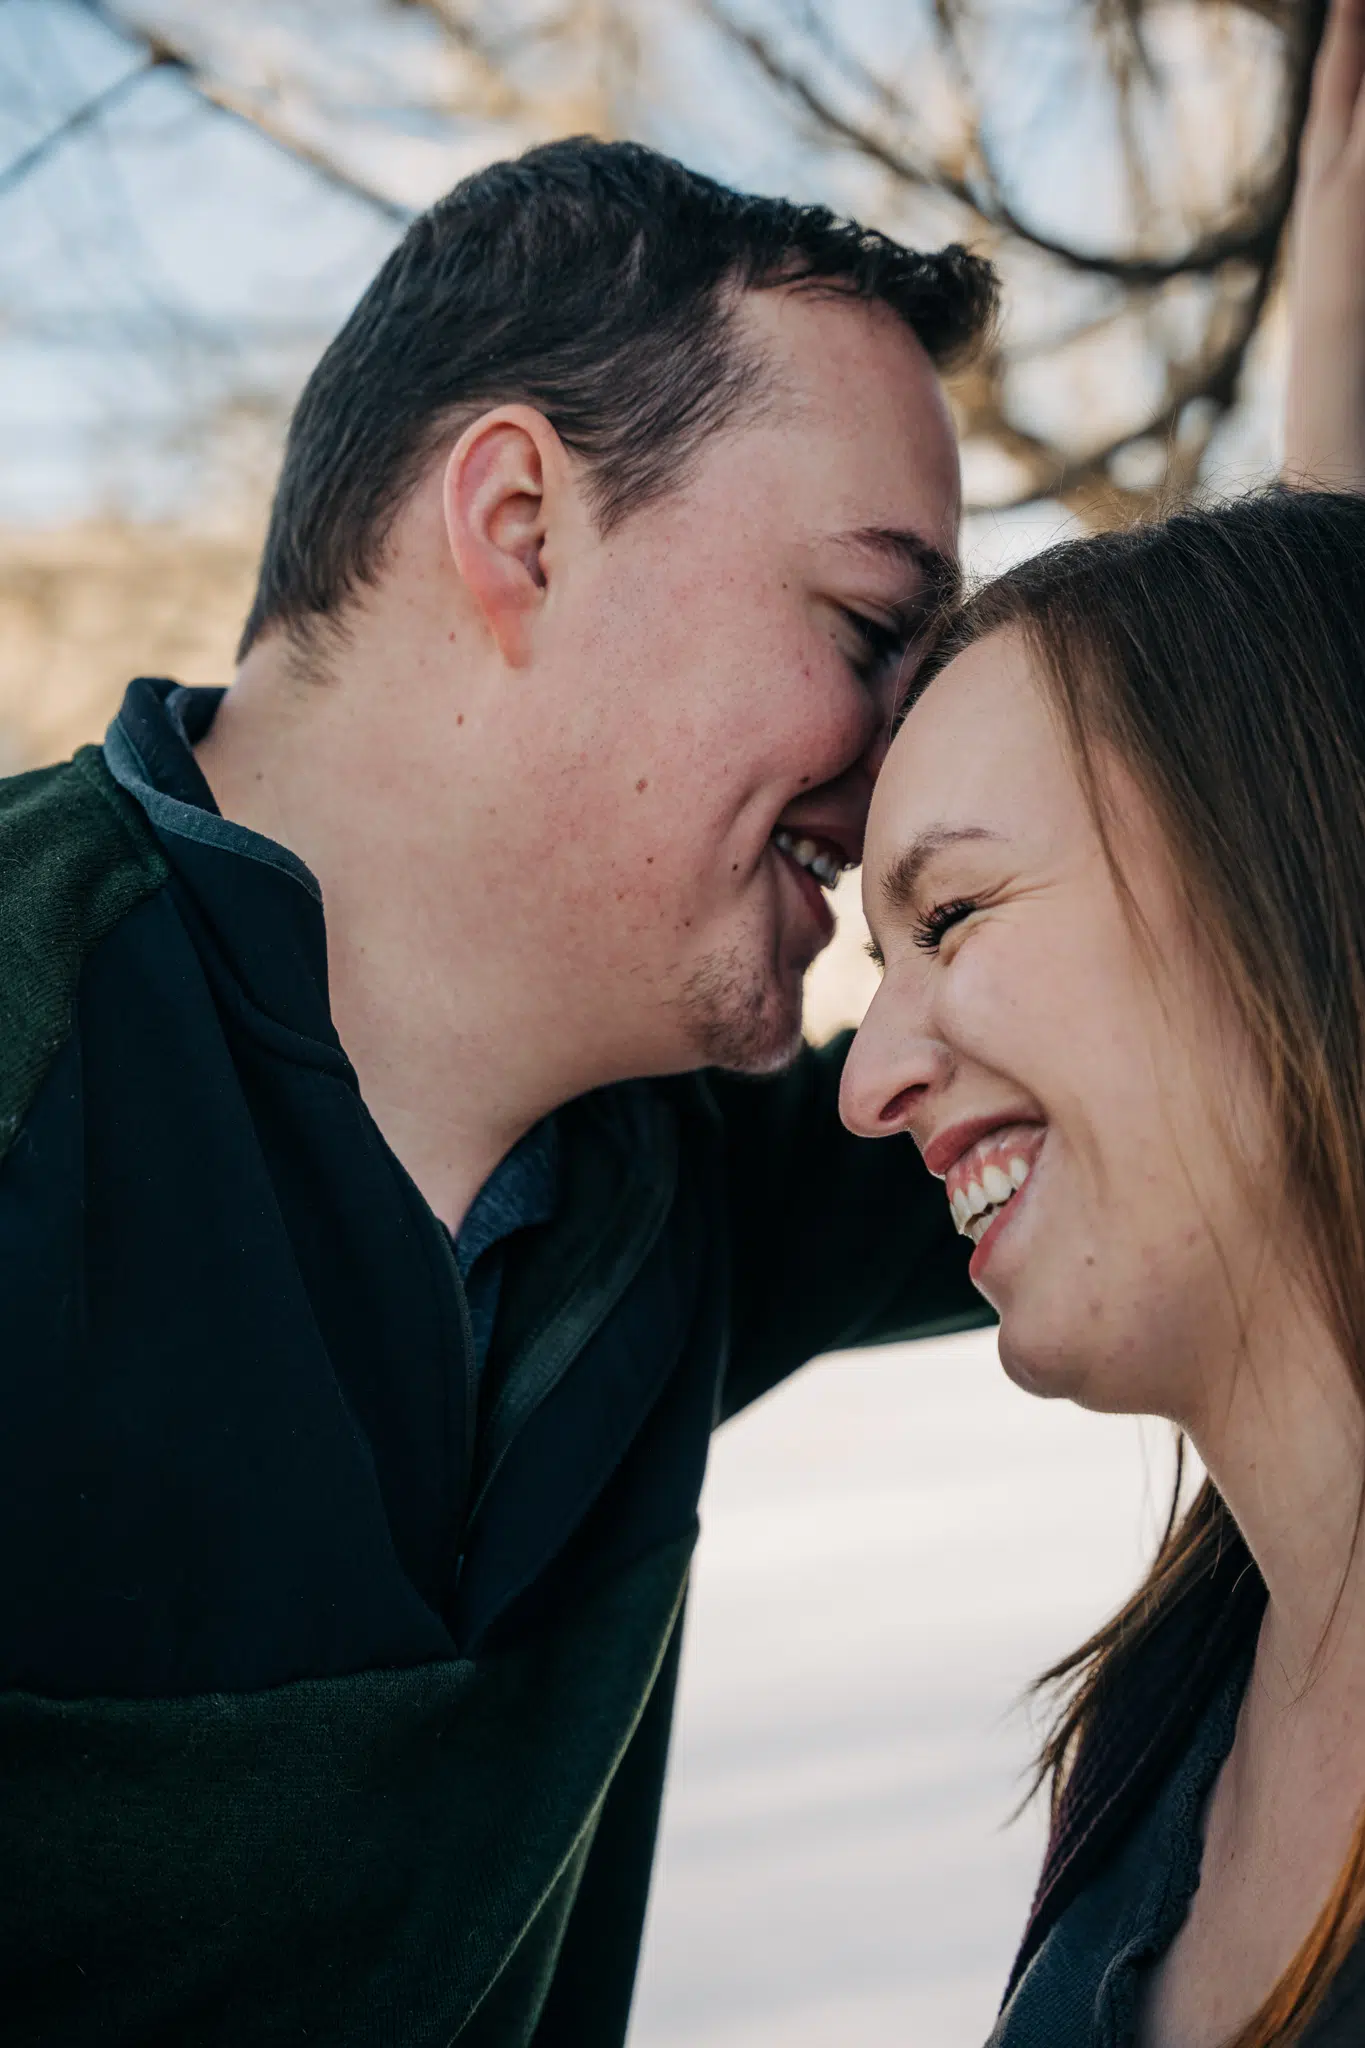 Headwater State Park Engagement Photography By Charles Moll Photography